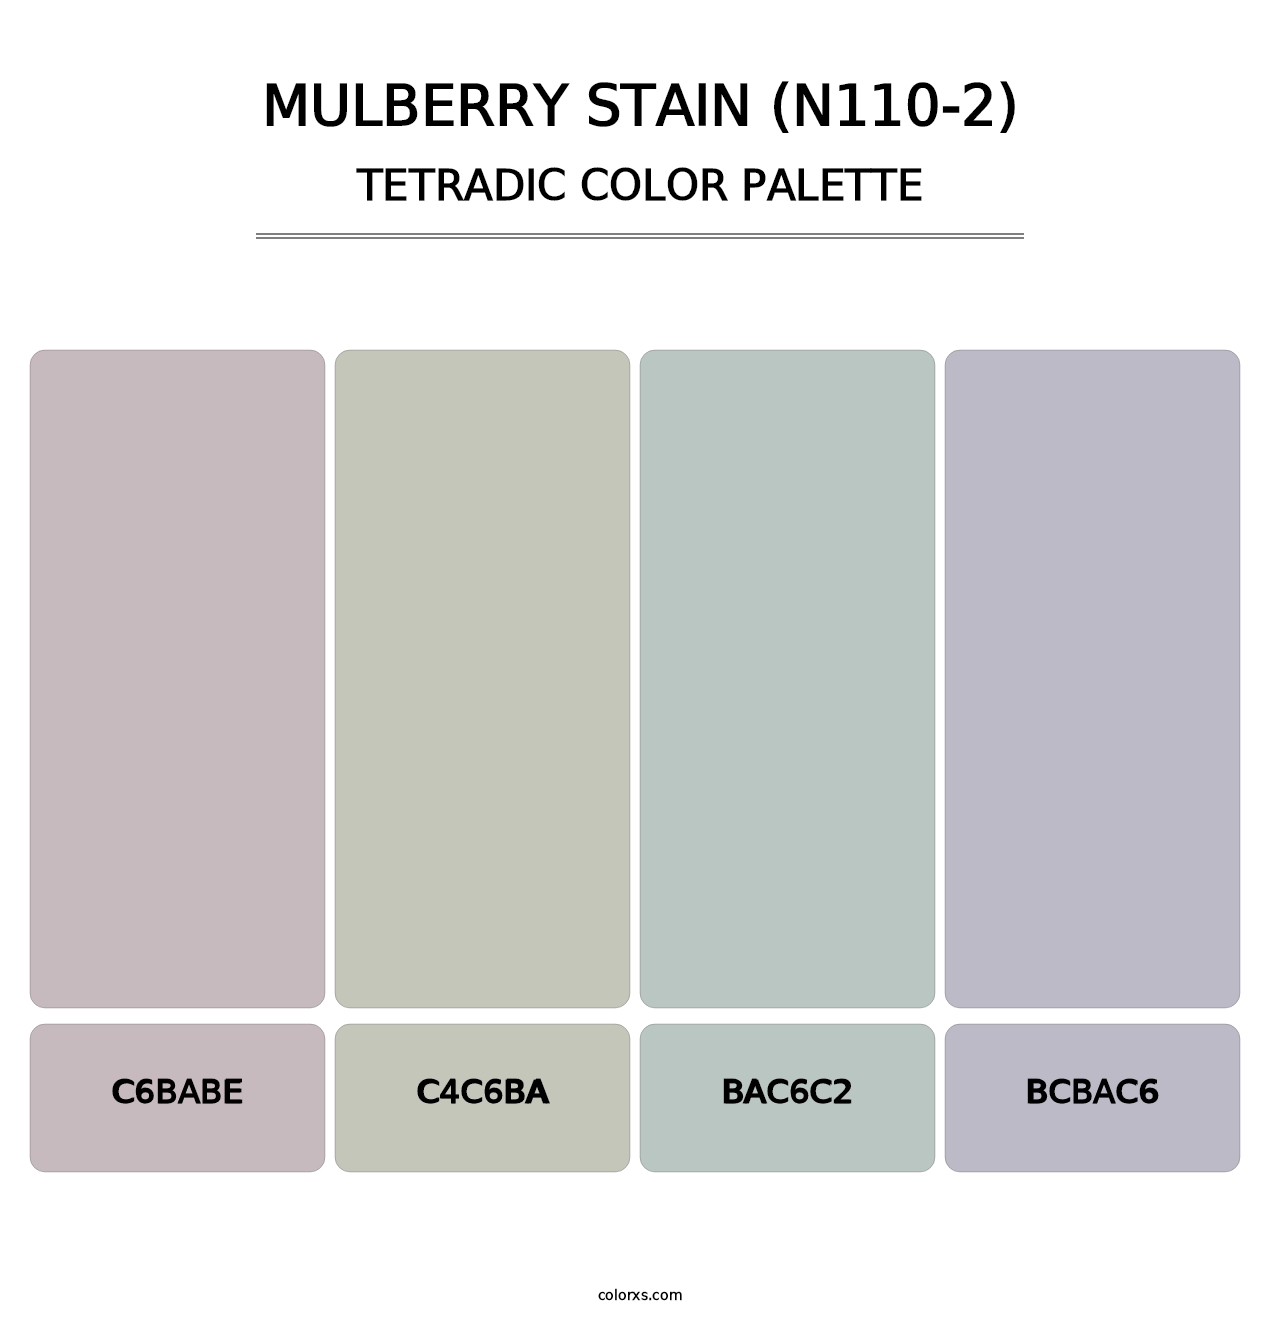 Mulberry Stain (N110-2) - Tetradic Color Palette